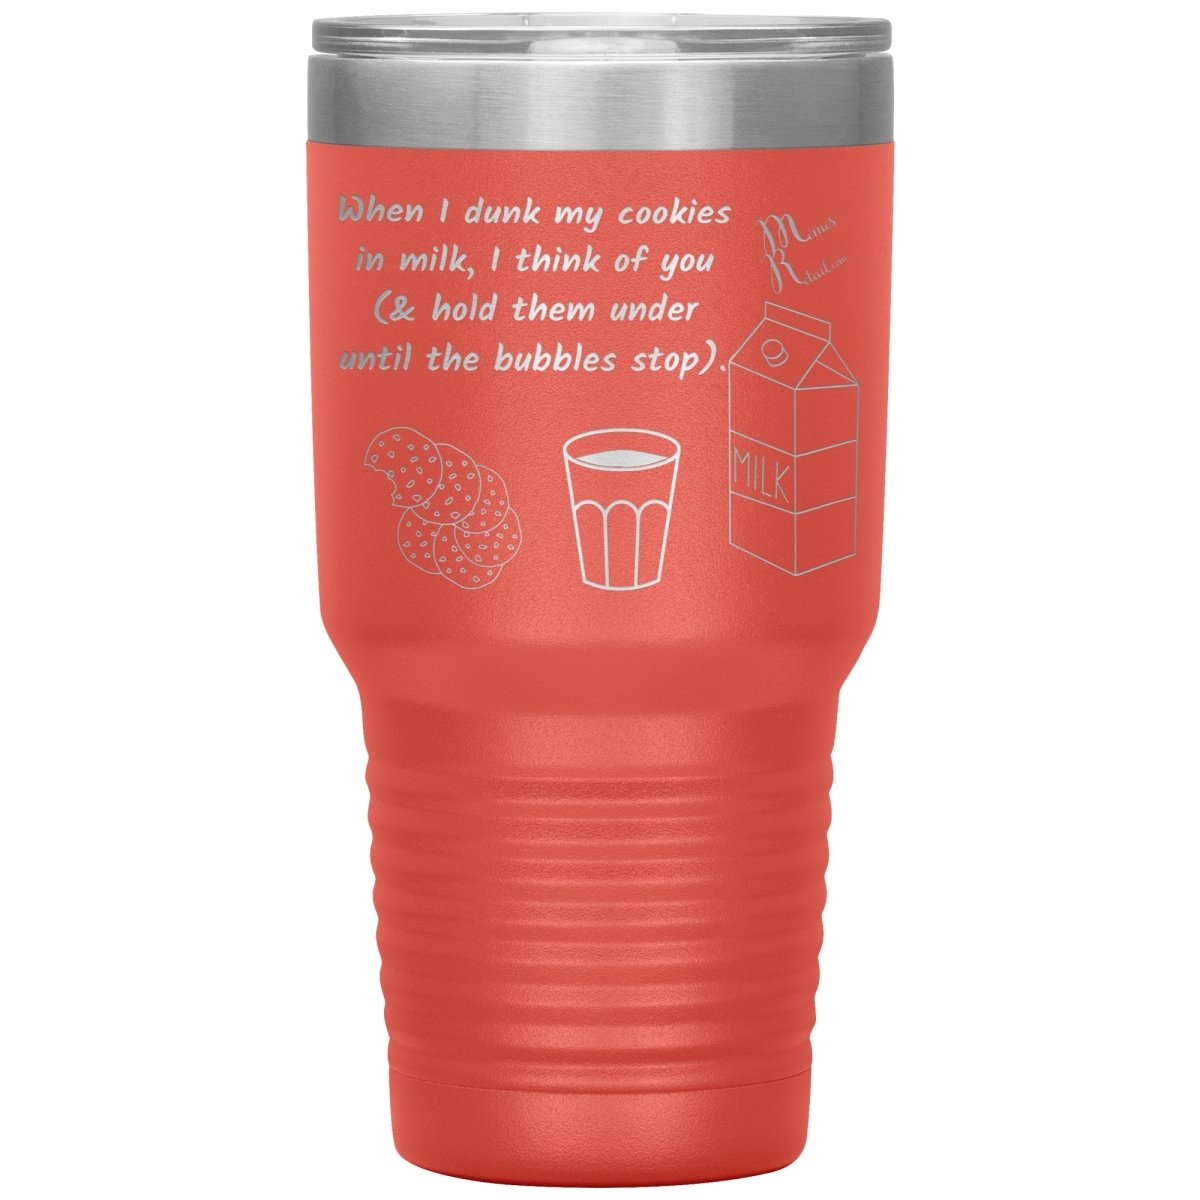 When I dunk My Cookies in Milk, I think of You - Tumblers, 30oz Insulated Tumbler / Coral - MemesRetail.com